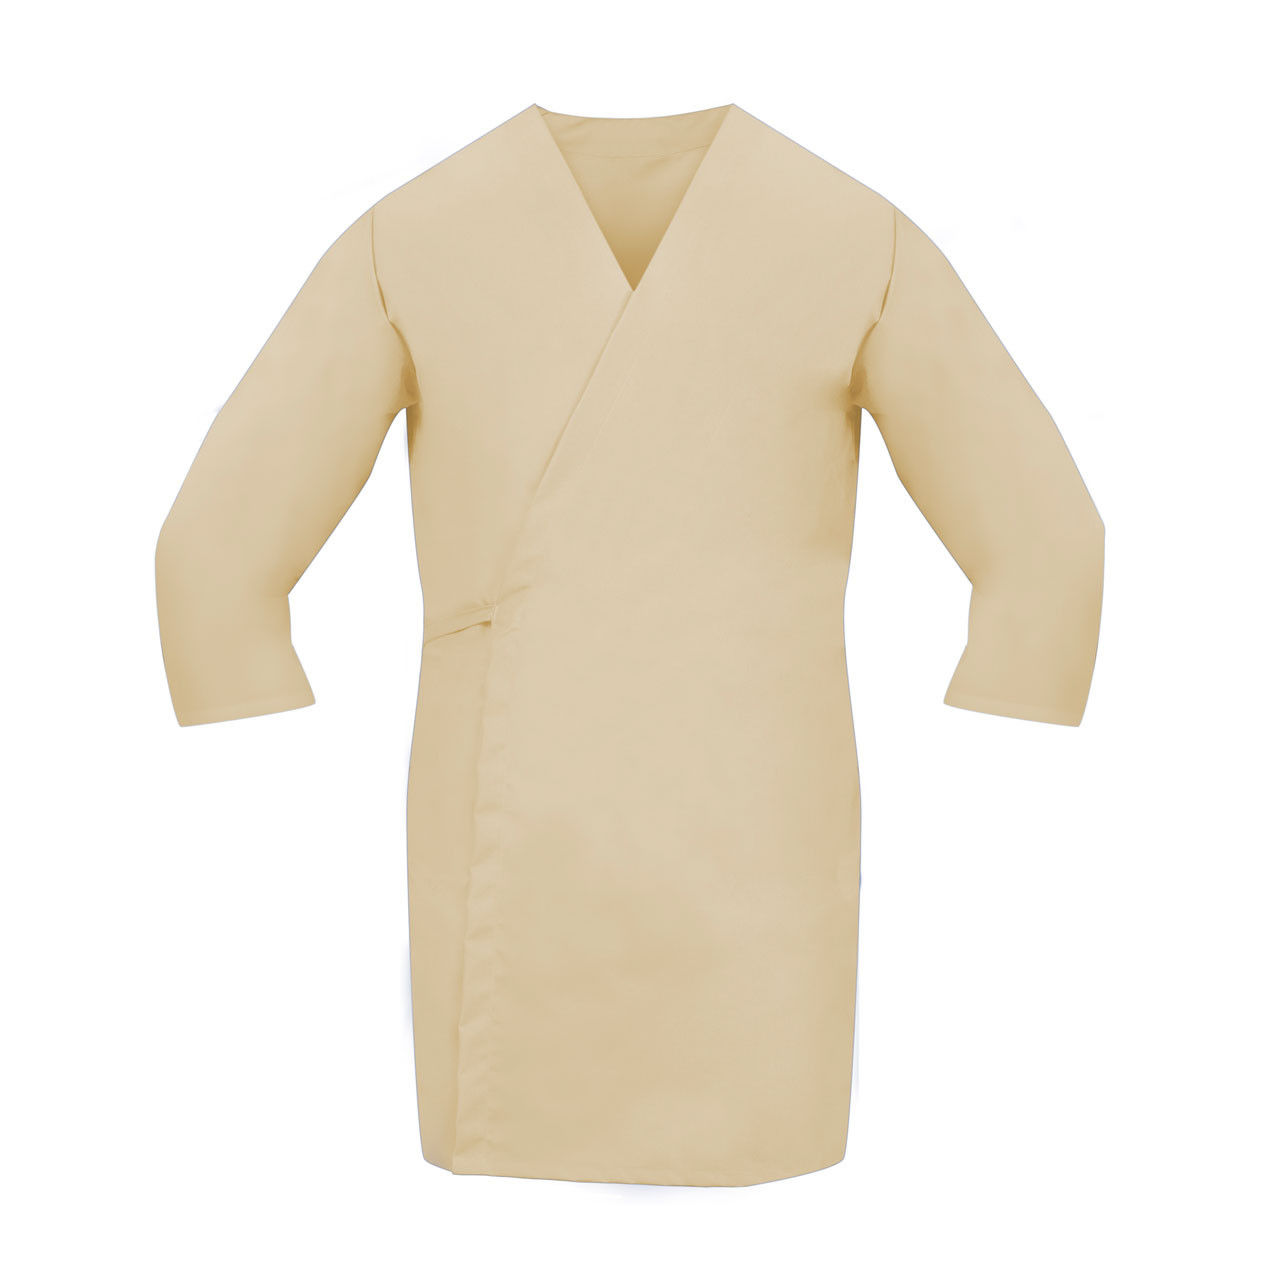 What is the fabric weight of the Tan Smock Wraps?